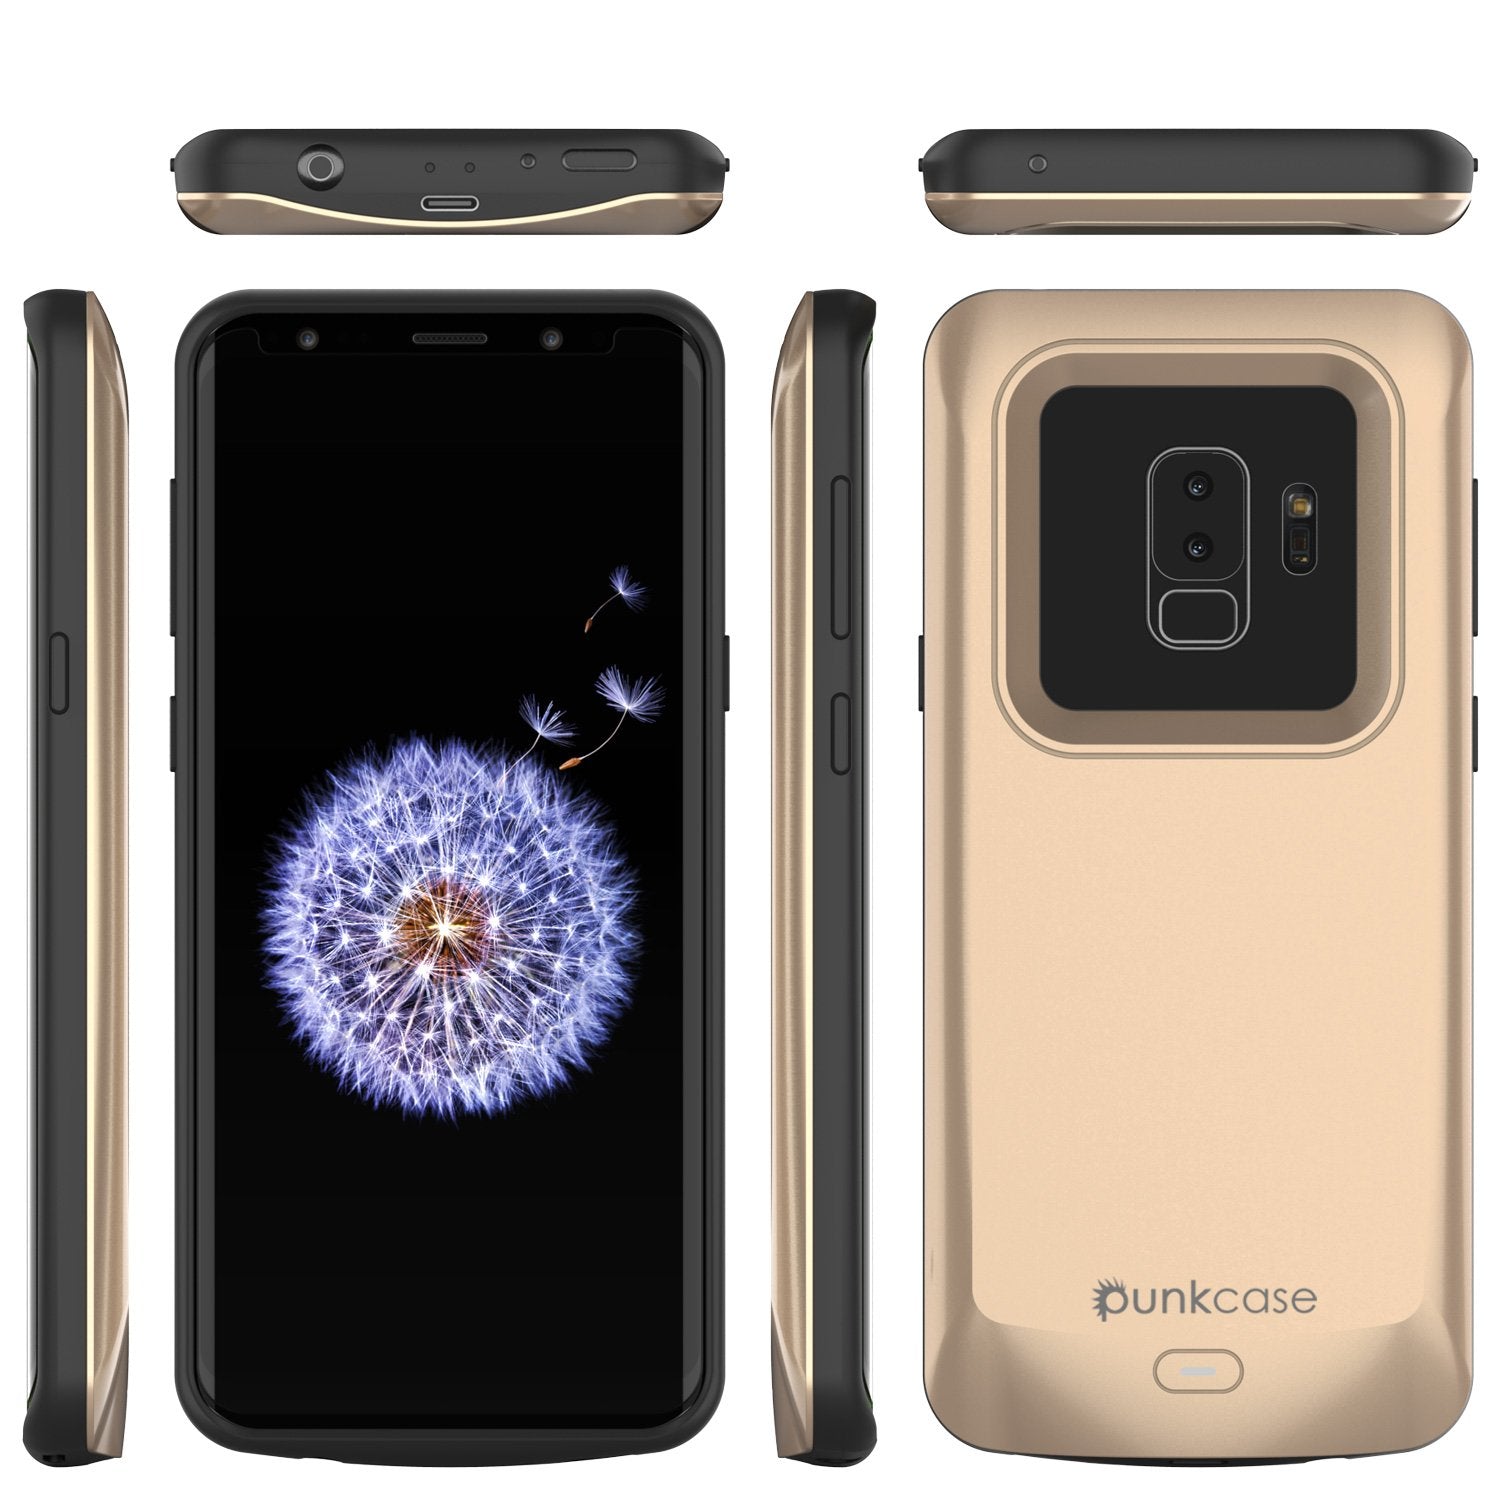 Galaxy S9 PLUS Battery Case, PunkJuice 5000mAH Fast Charging Power Bank W/ Screen Protector | Integrated USB Port | IntelSwitch | Slim, Secure and Reliable | Suitable for Samsung Galaxy S9+ [Gold]